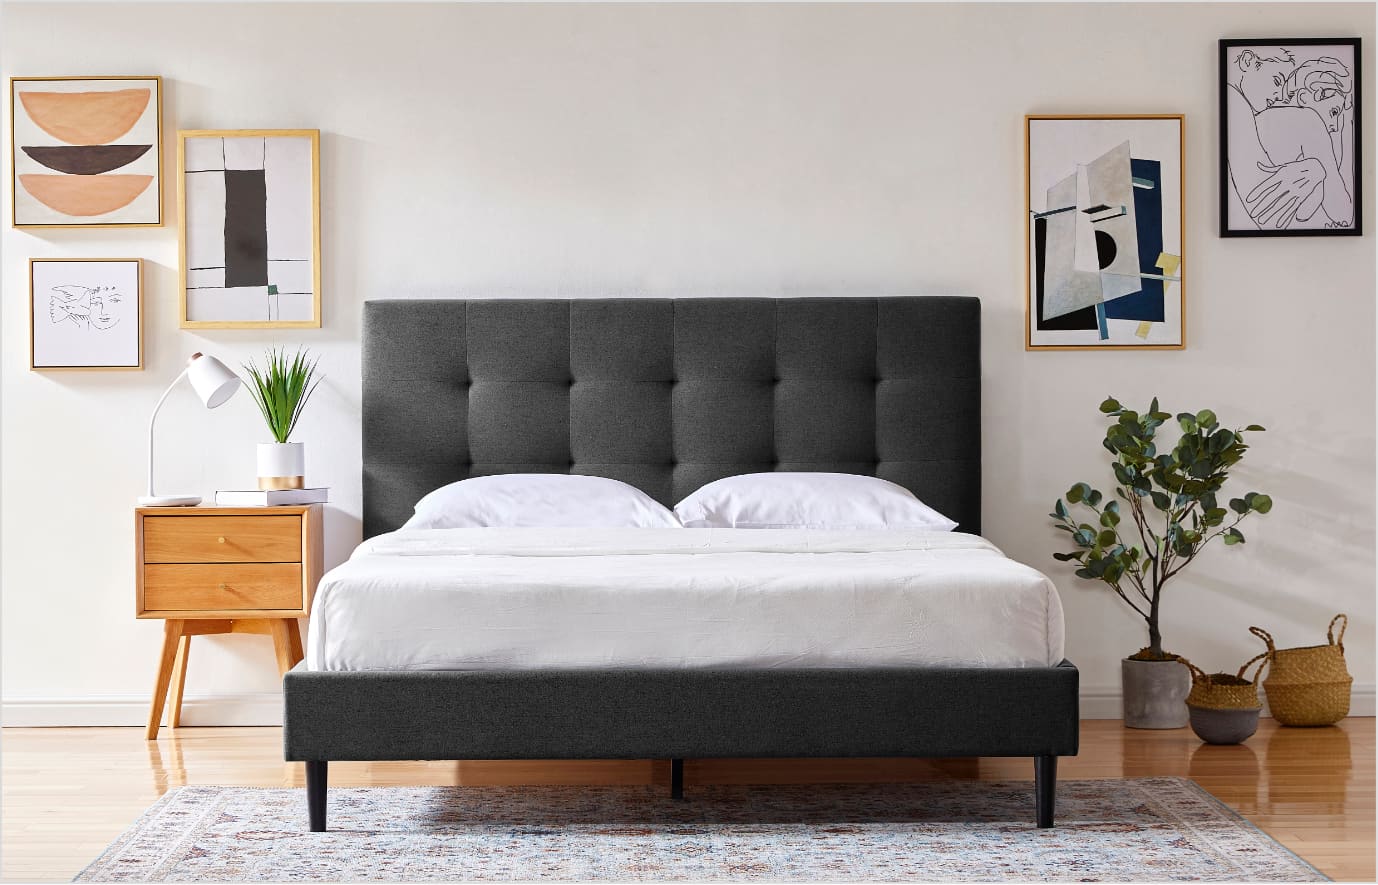 What Are Dimensions Of A Queen Bed